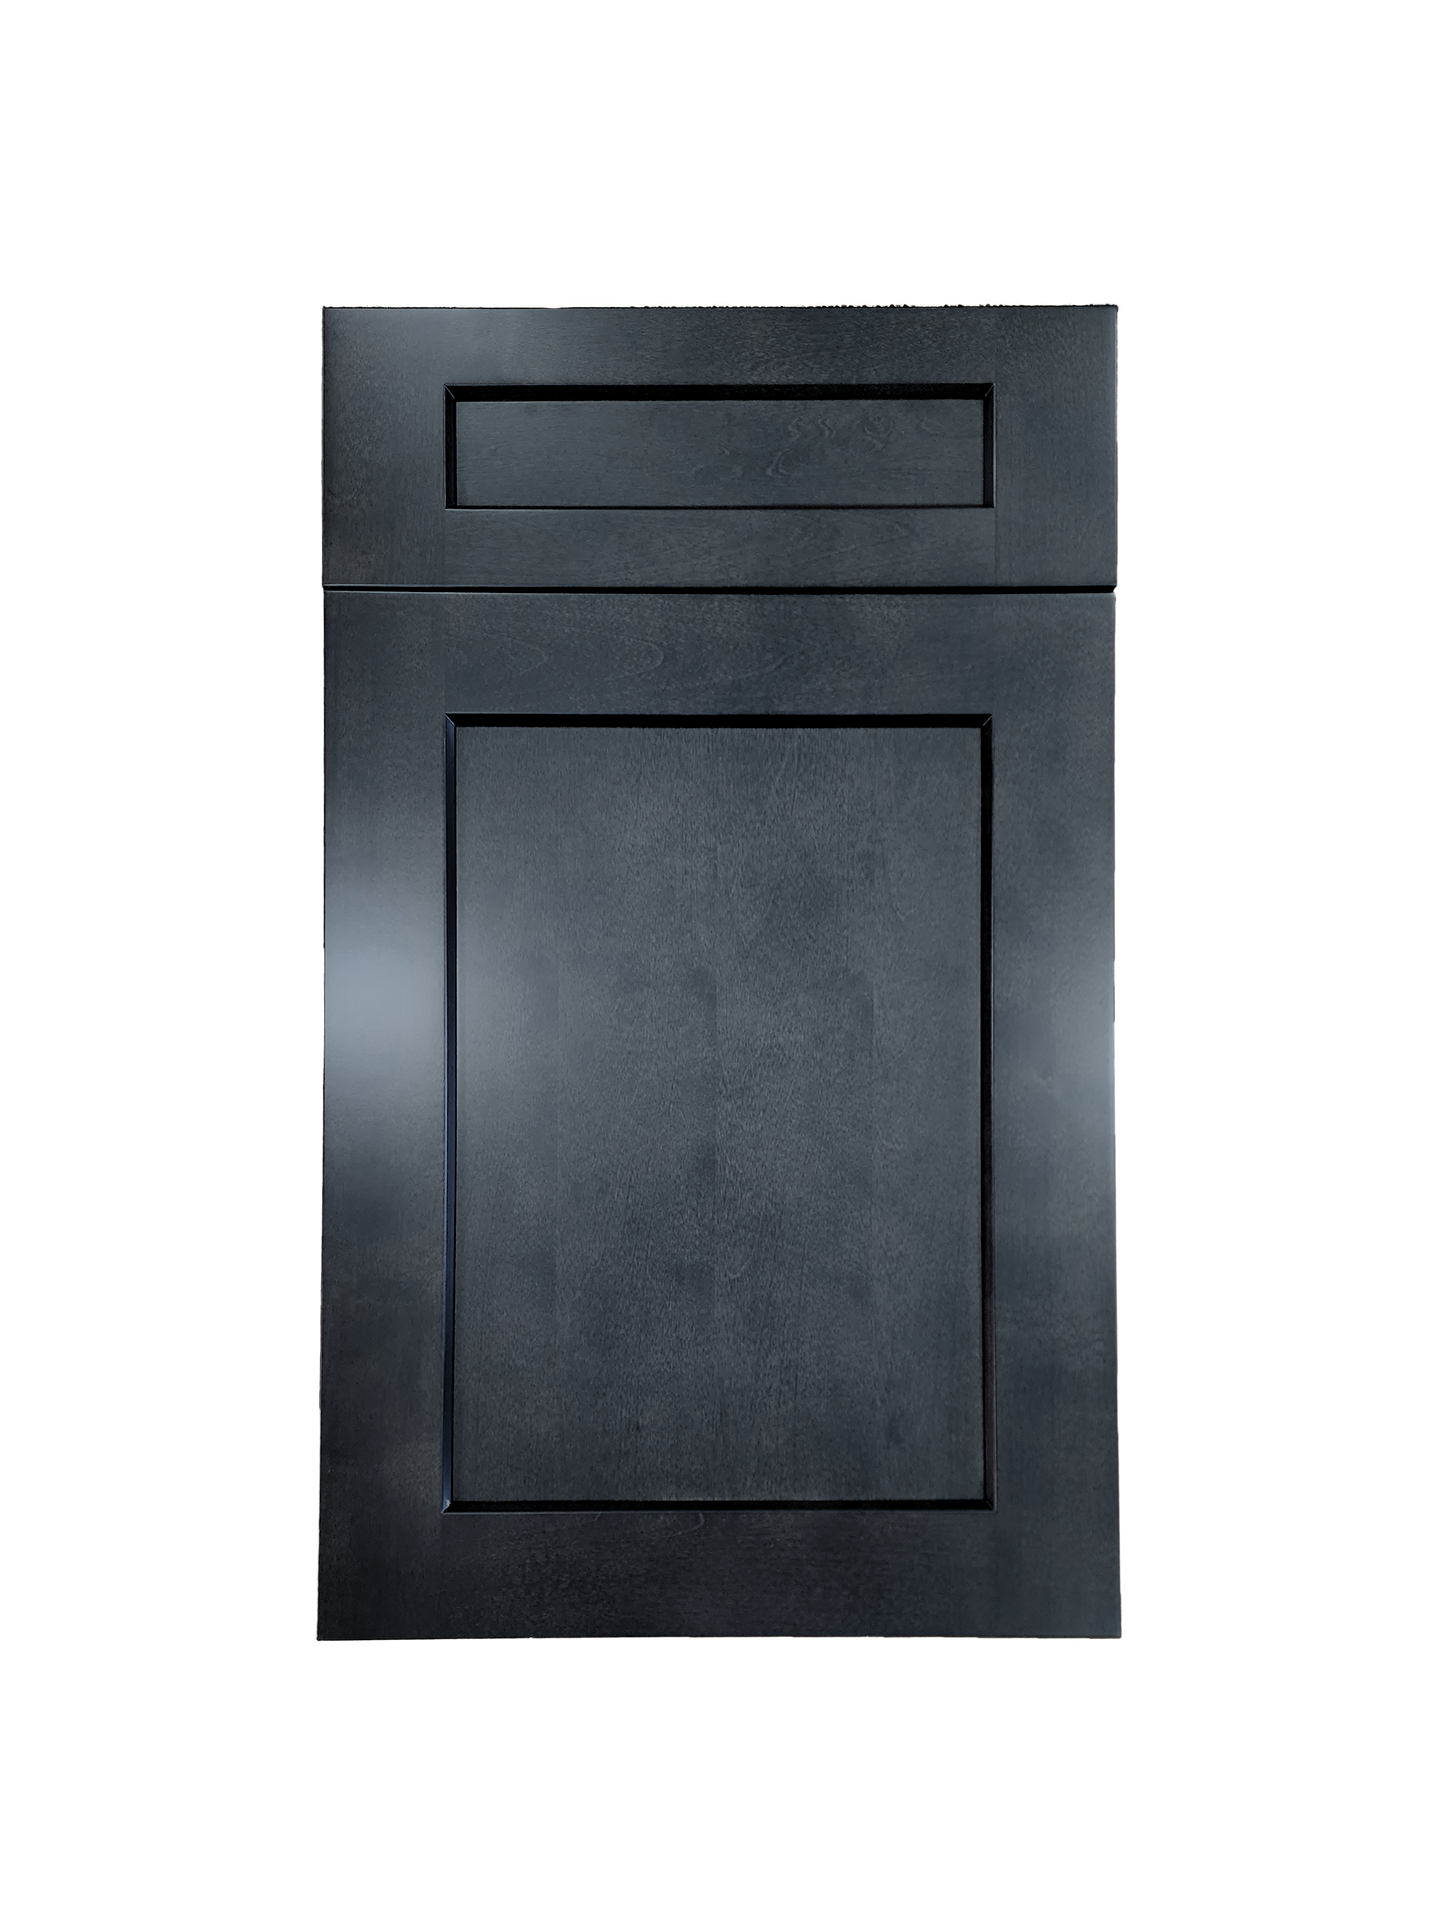 Stormy Grey Base Cabinet 21 inches wide 24 inches deep 34.5 inches tall with Stormy Grey box and Stormy Grey doors